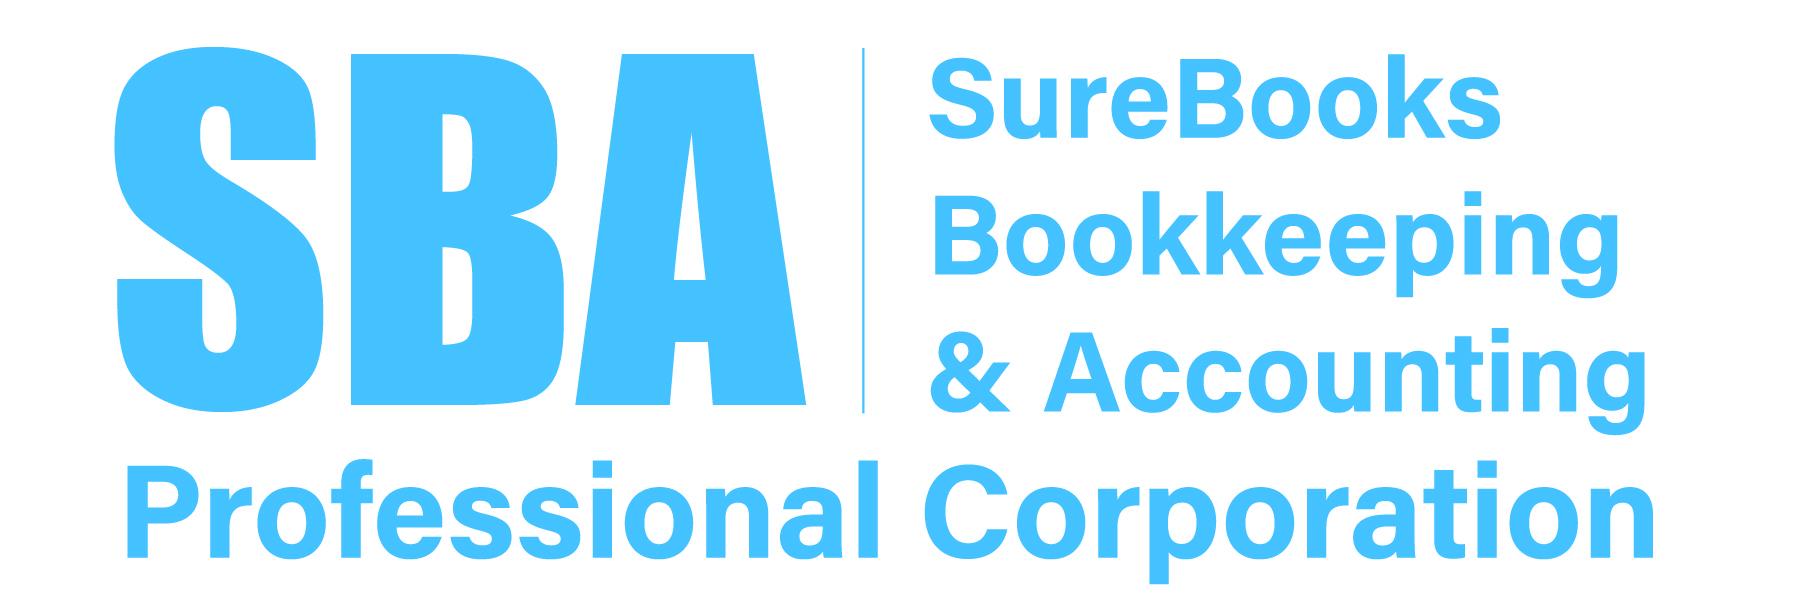 Surebooks Bookkeeping and Accounting Professional Corporation